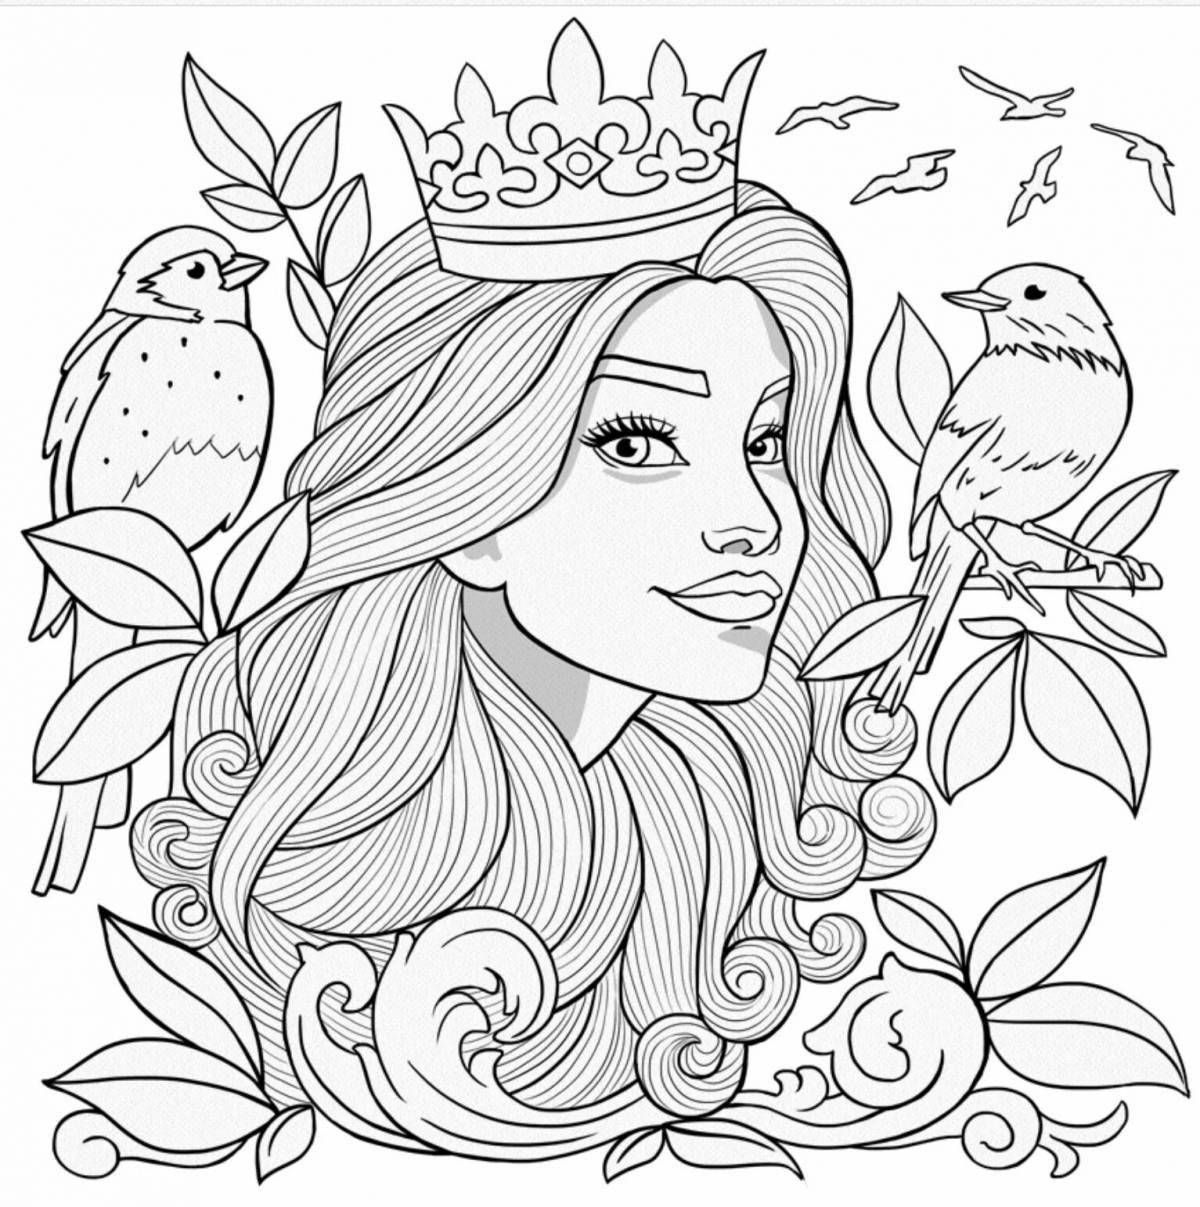 Colorful modern coloring picture for girls 10 years old